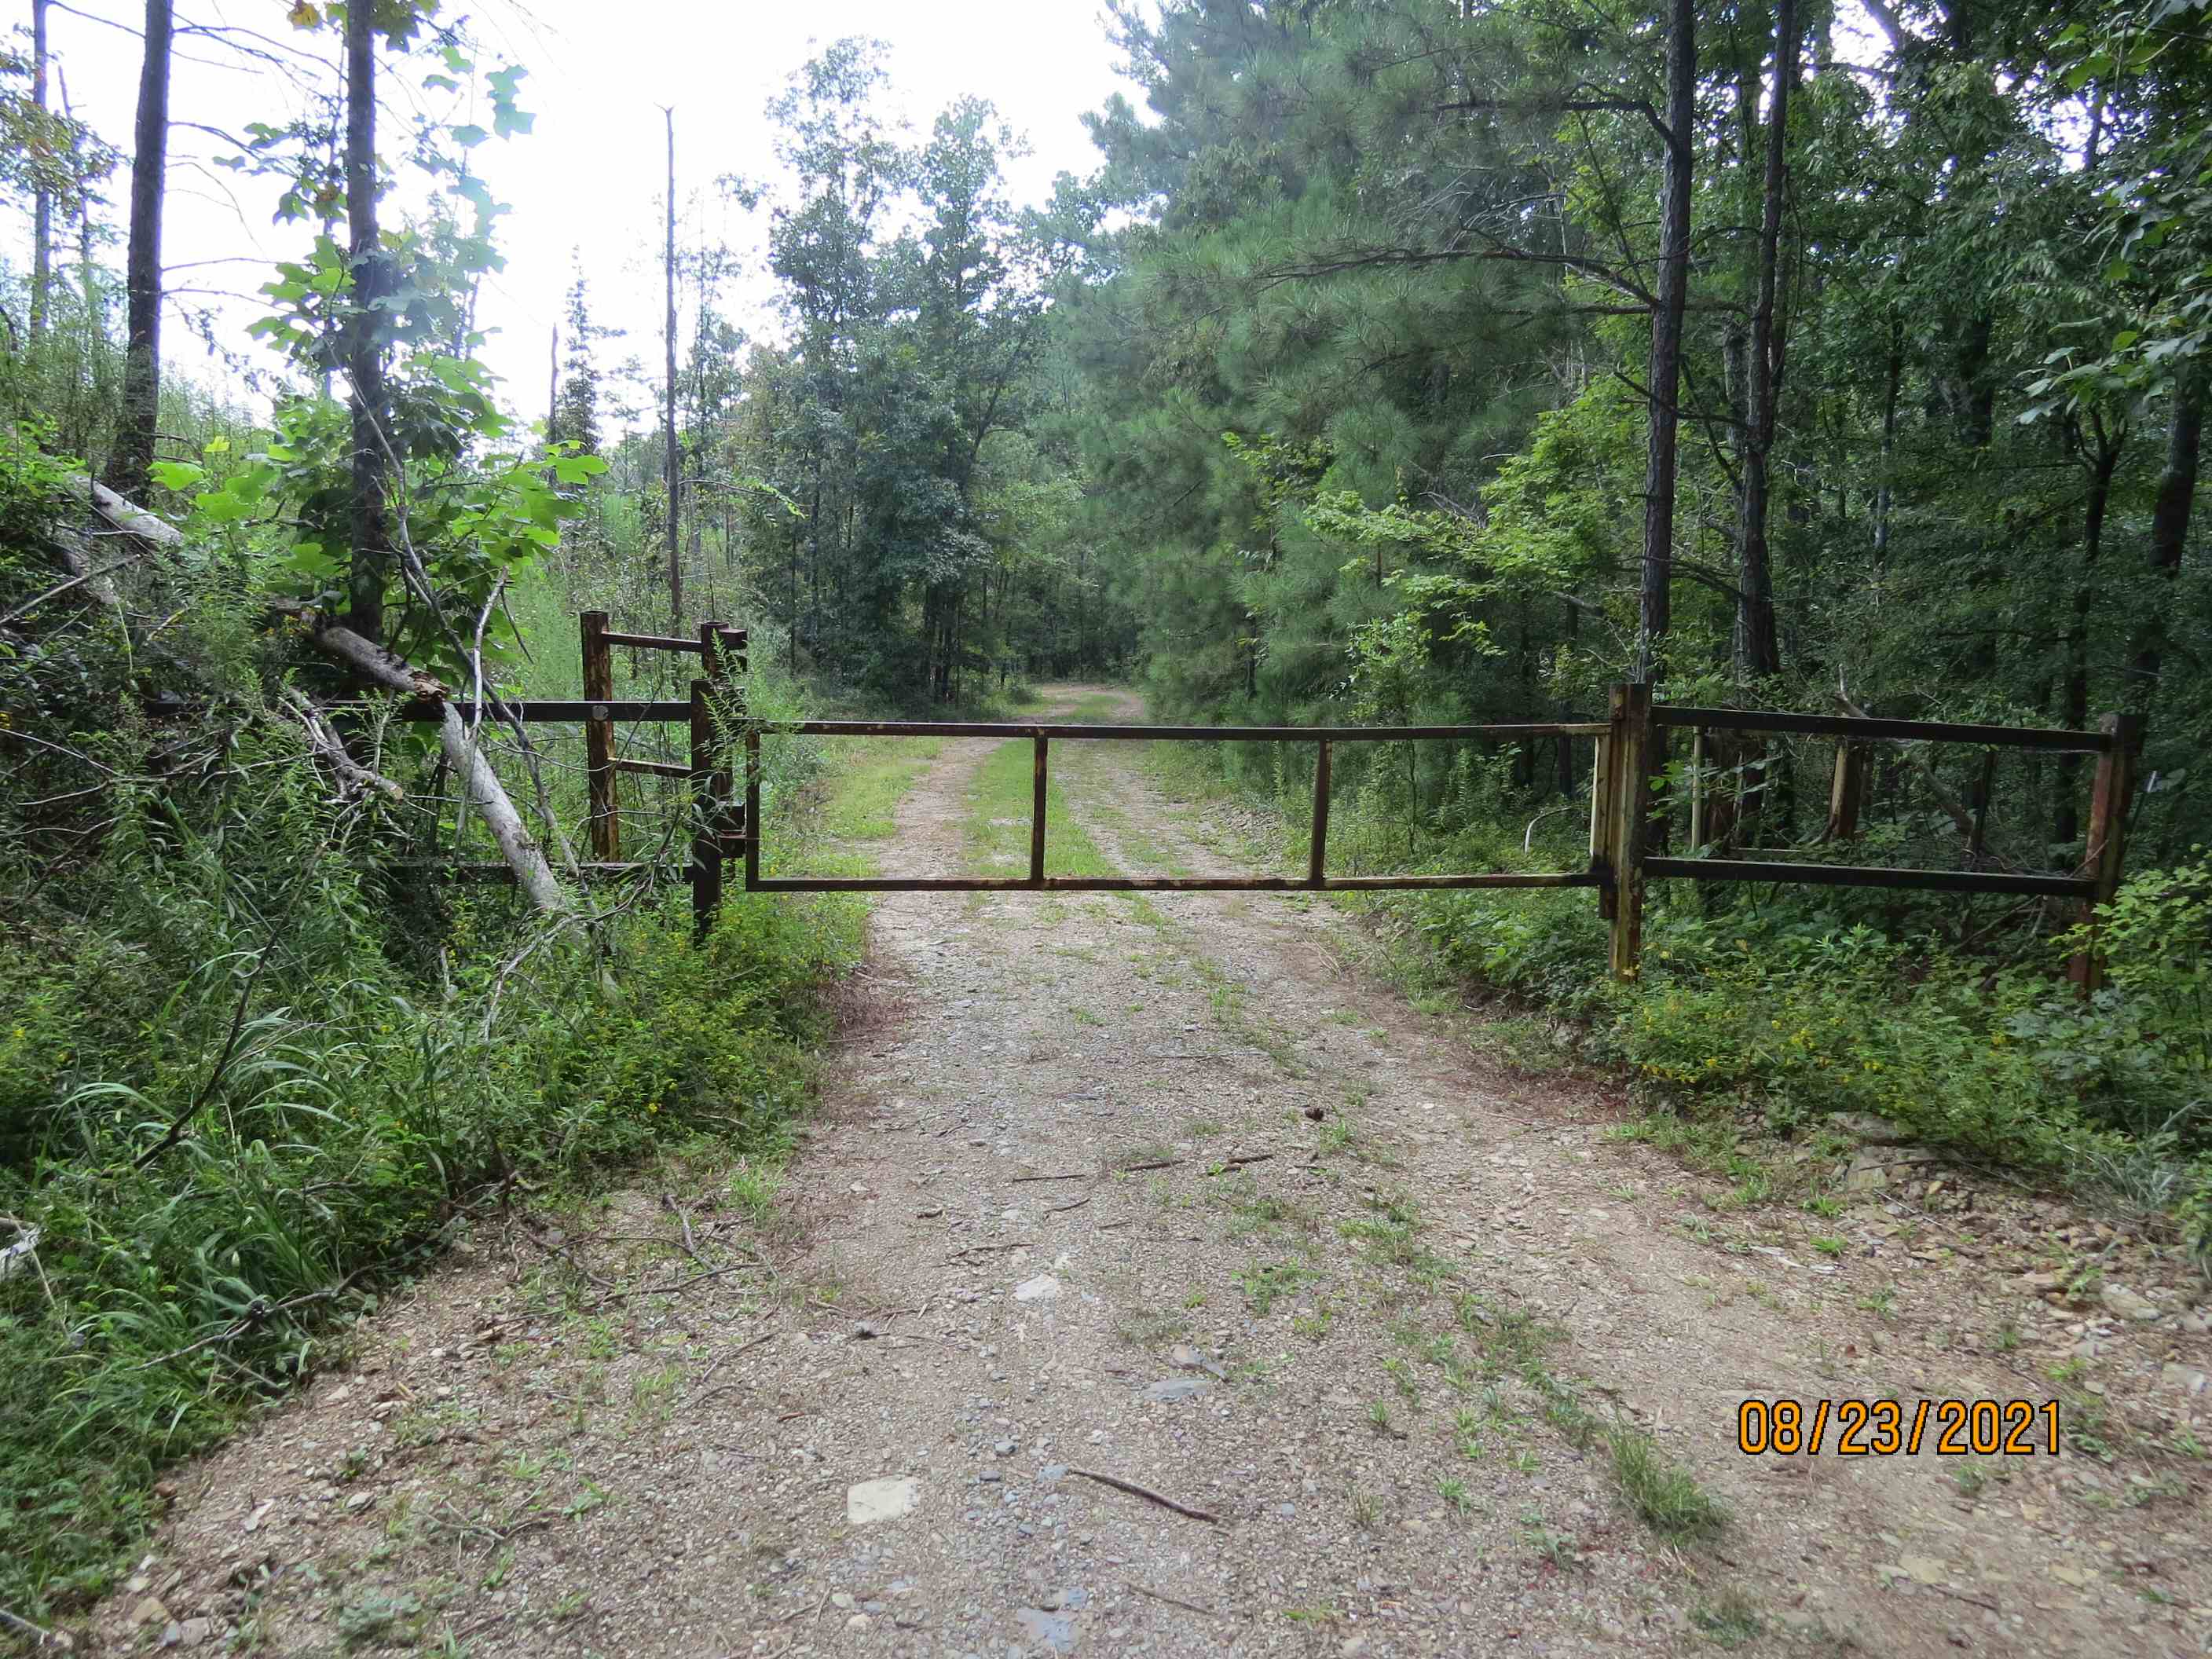 The gate at the property line